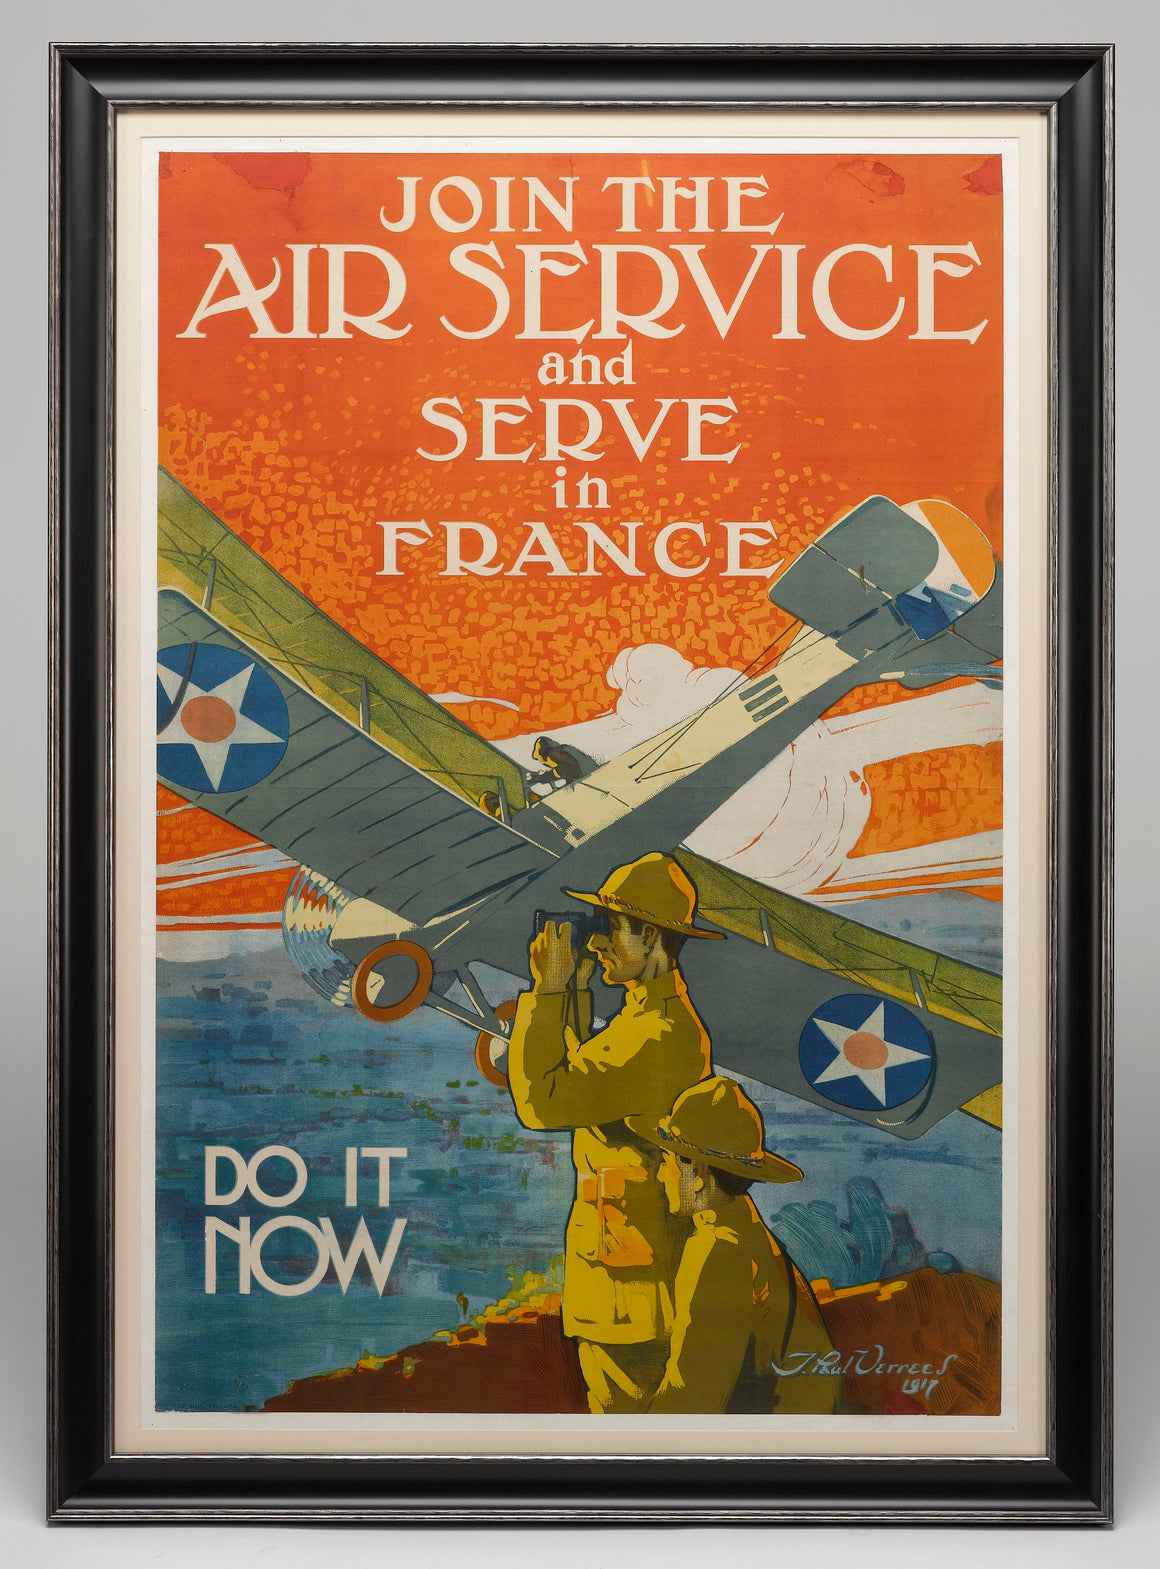 "Join the Air Service and Serve in France" Vintage WWI Poster by J. Paul Verrees, 1917